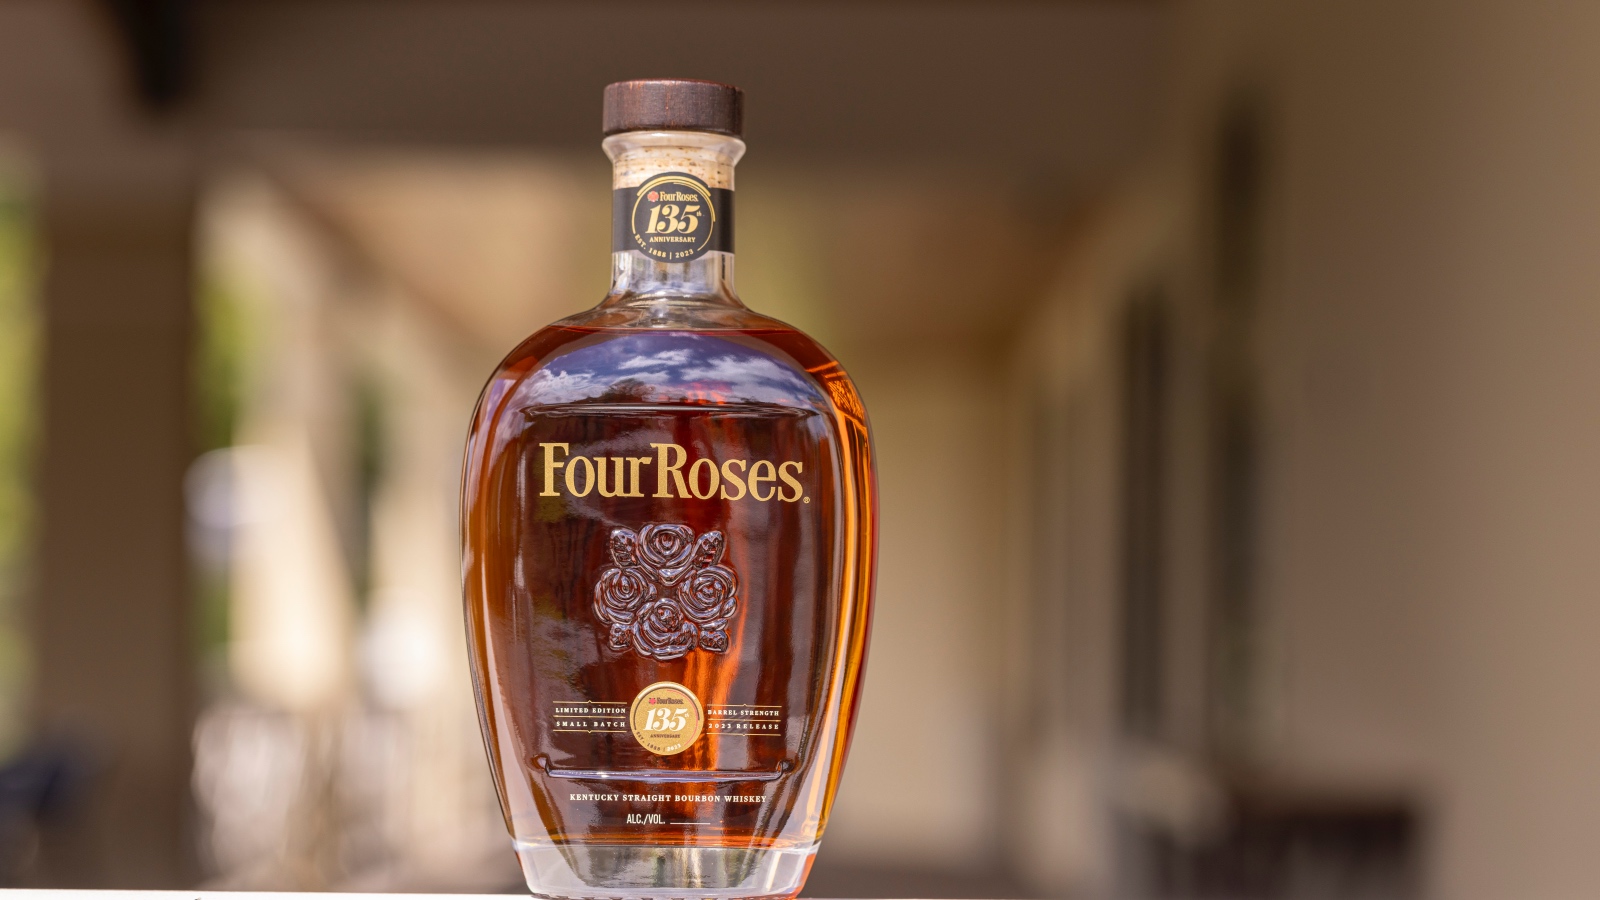 Four Roses 135th anniversary Limited Edition Small Batch bottle